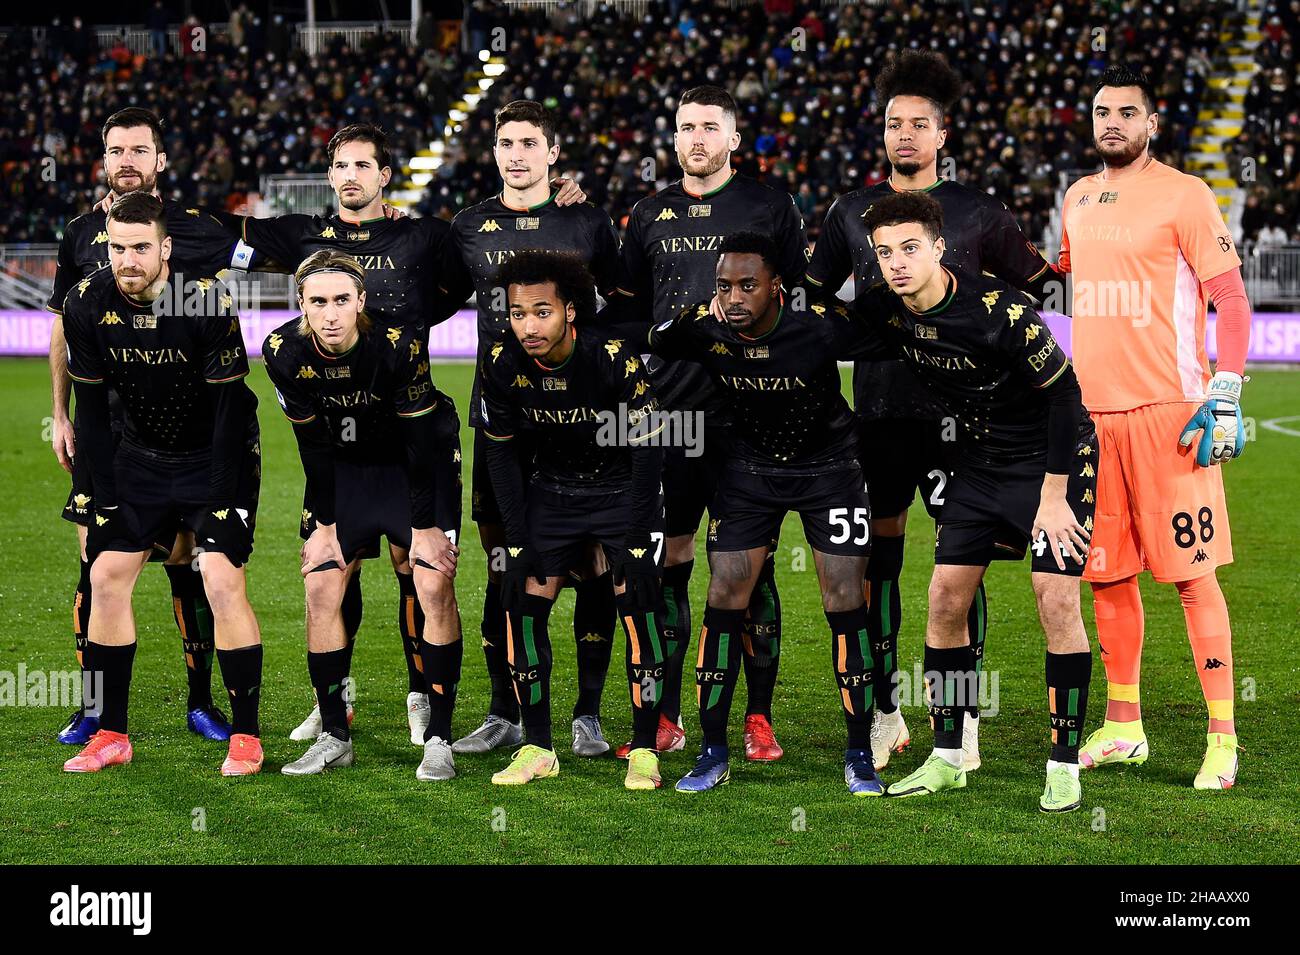 Venice, Italy. 11 December 2021. Players of Venezia FC pose for a team  photo prior to the Serie A football match between Venezia FC and Juventus  FC. Credit: Nicolò Campo/Alamy Live News